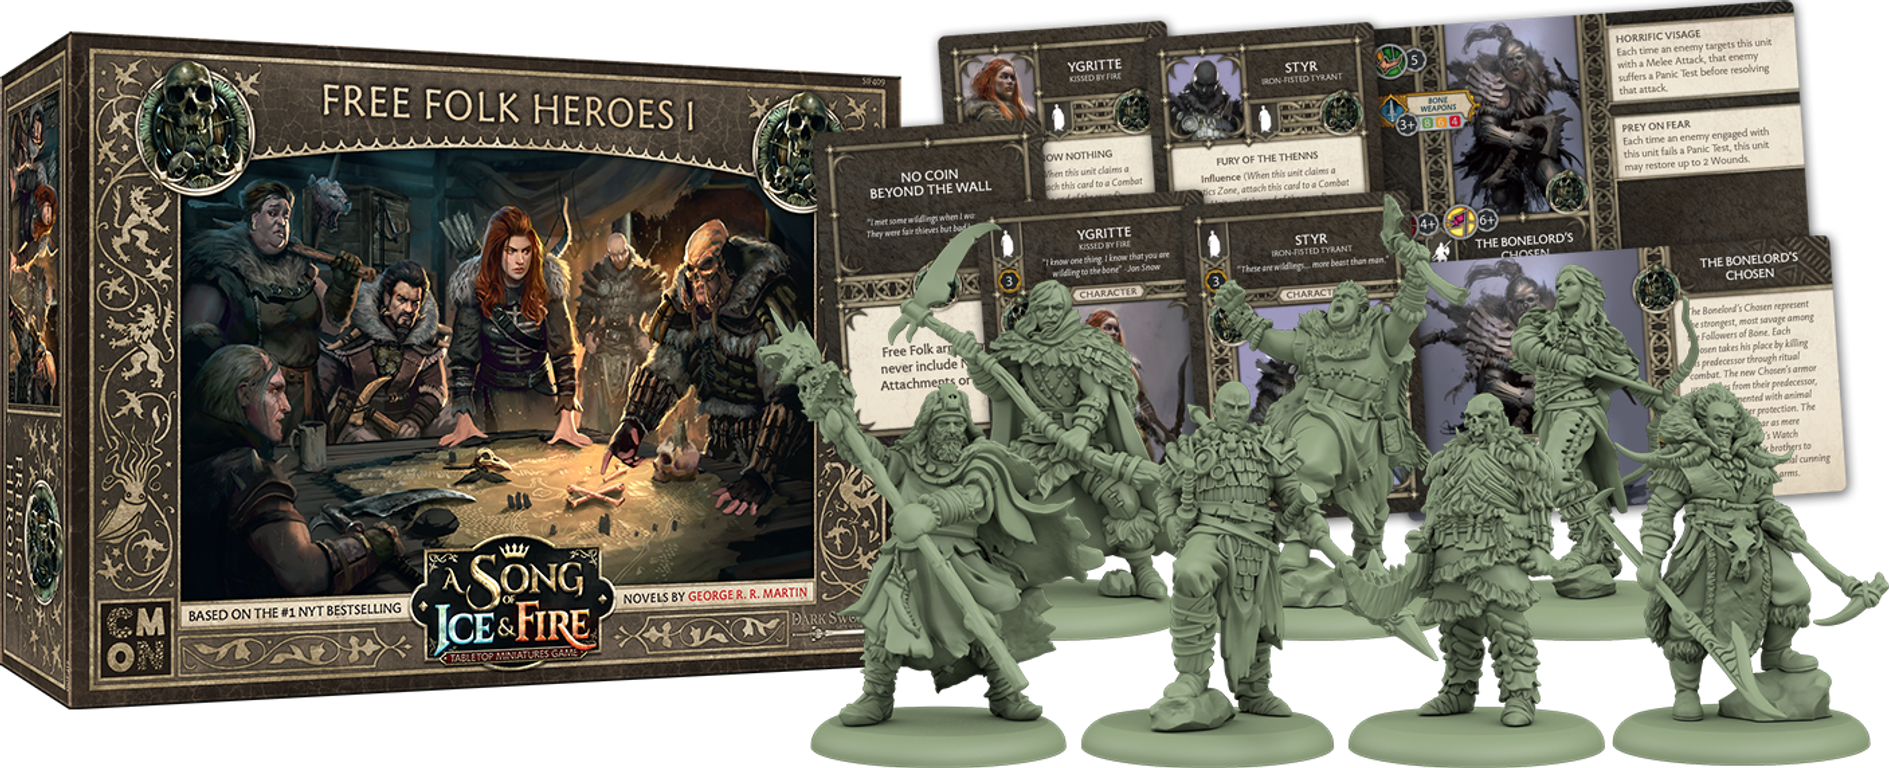 A Song of Ice & Fire: Tabletop Miniatures Game – Free Folk Heroes I komponenten